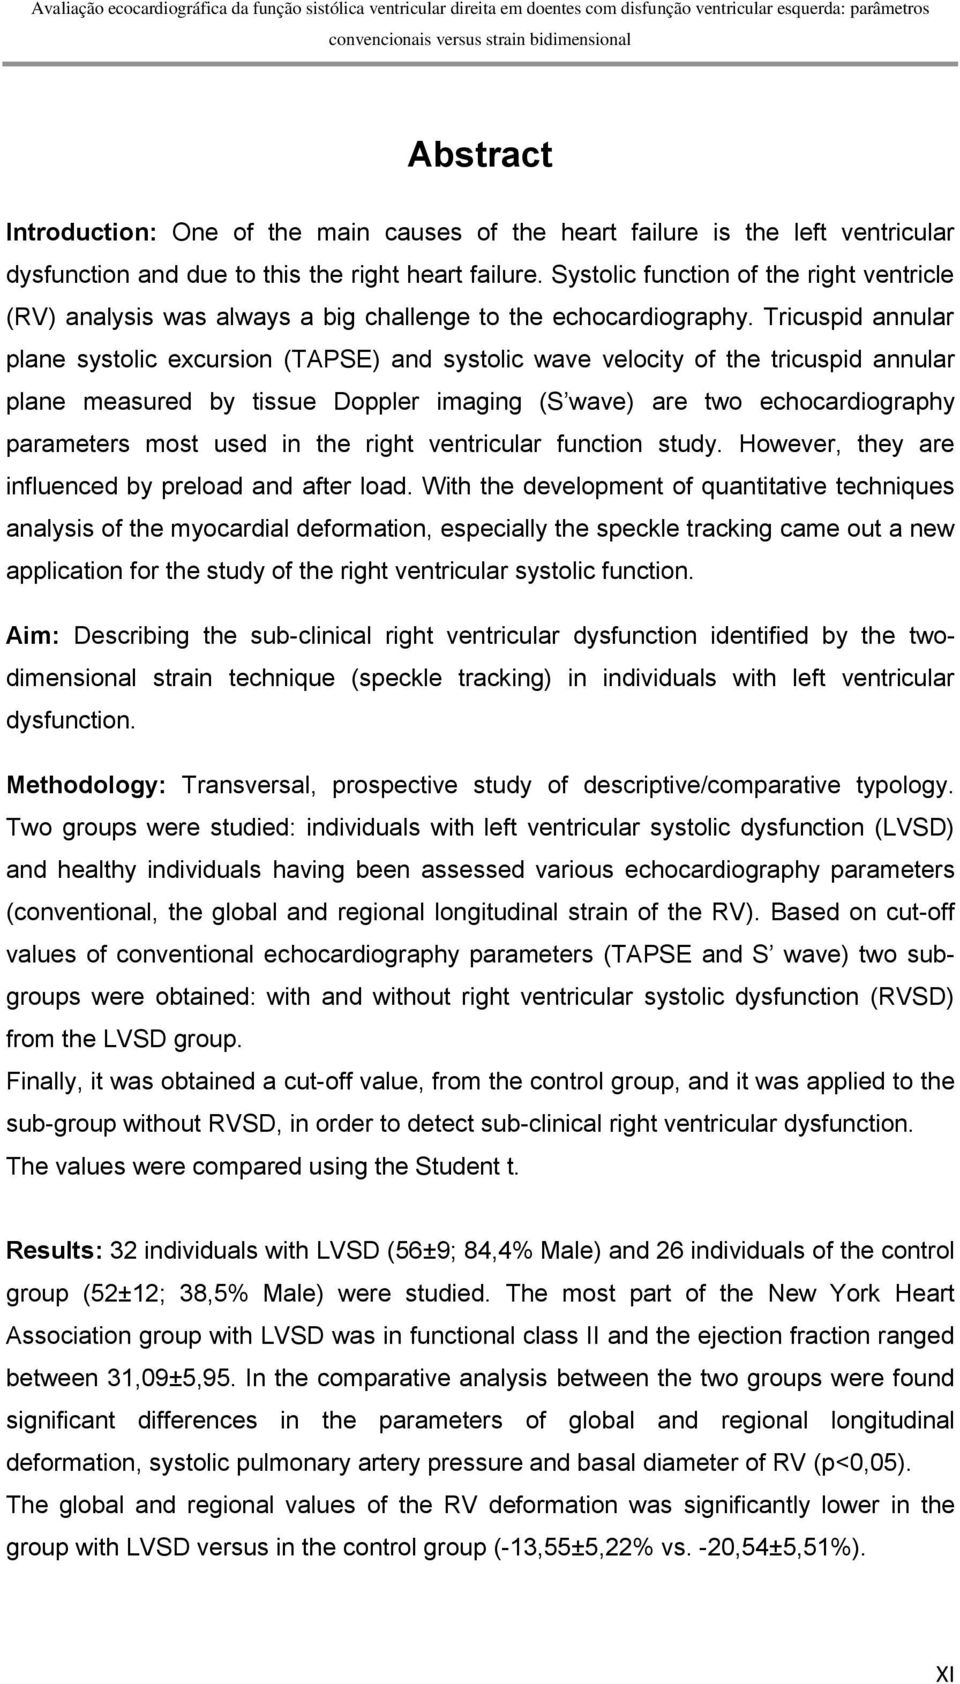 Tricuspid annular plane systolic excursion (TAPSE) and systolic wave velocity of the tricuspid annular plane measured by tissue Doppler imaging (S wave) are two echocardiography parameters most used